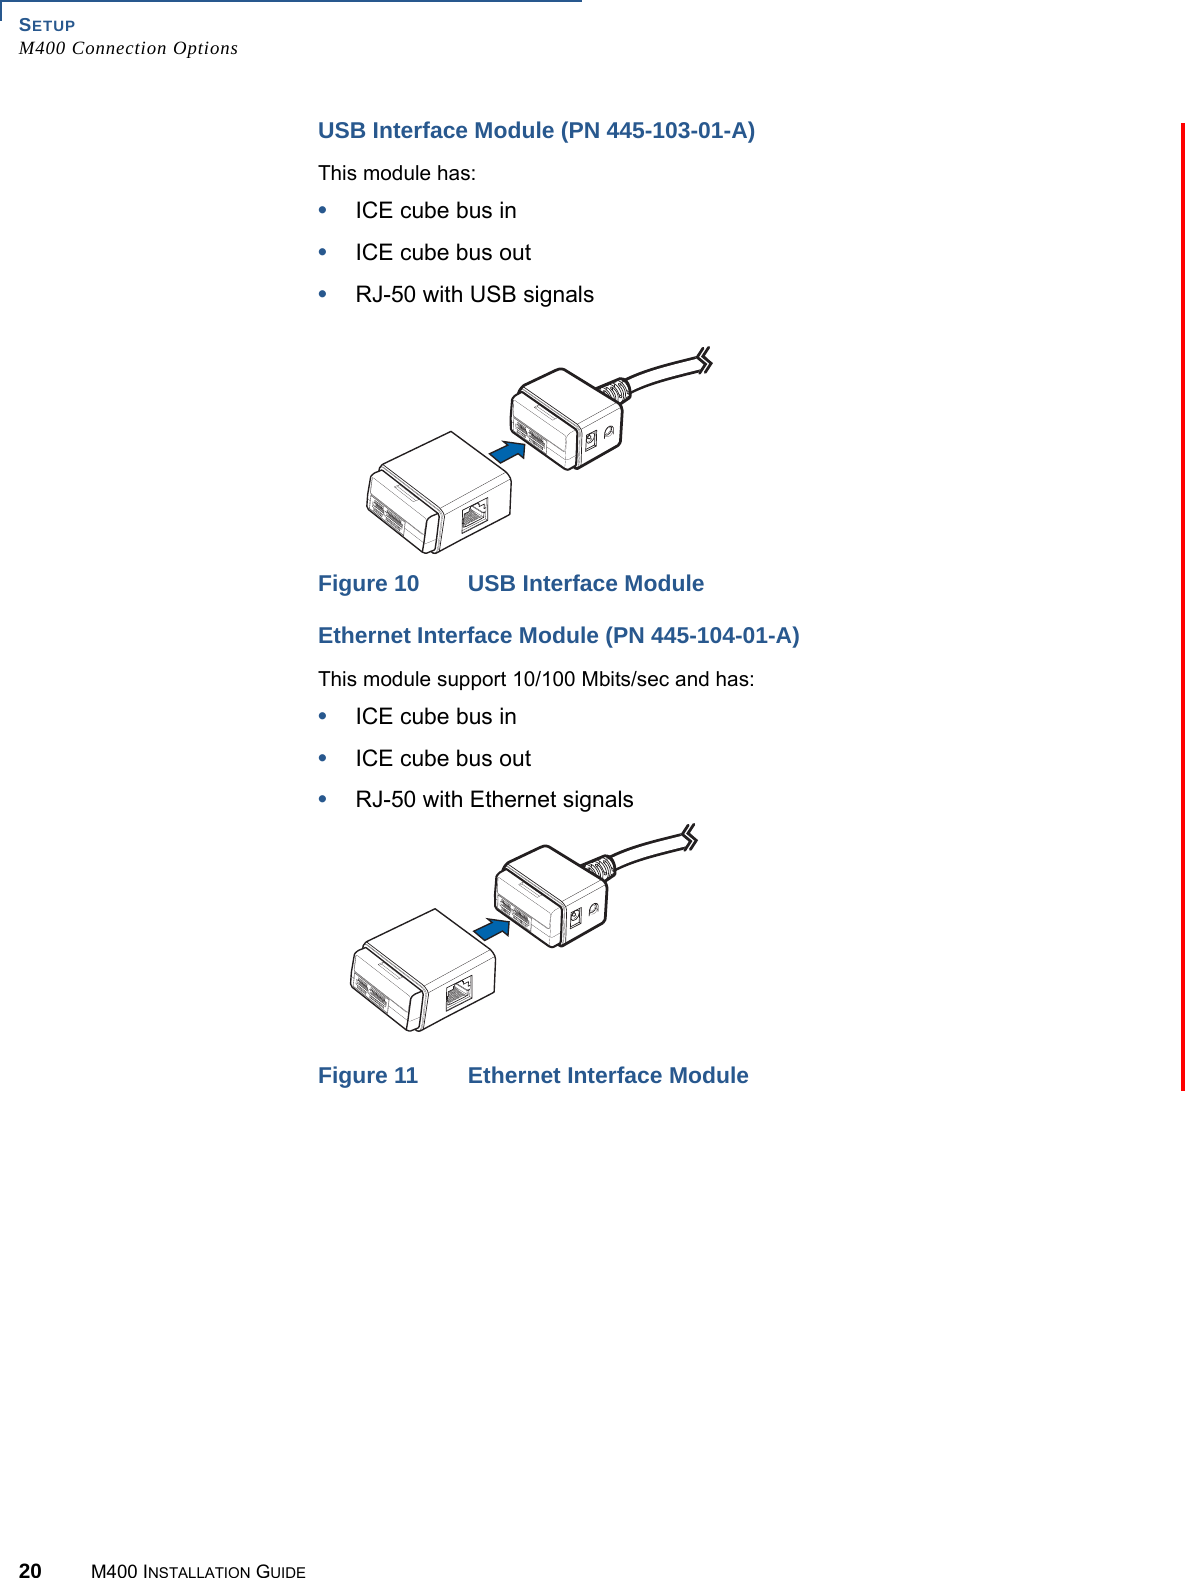 SETUPM400 Connection Options20 M400 INSTALLATION GUIDEUSB Interface Module (PN 445-103-01-A)This module has:•ICE cube bus in•ICE cube bus out•RJ-50 with USB signalsFigure 10 USB Interface ModuleEthernet Interface Module (PN 445-104-01-A)This module support 10/100 Mbits/sec and has:•ICE cube bus in•ICE cube bus out•RJ-50 with Ethernet signalsFigure 11 Ethernet Interface Module